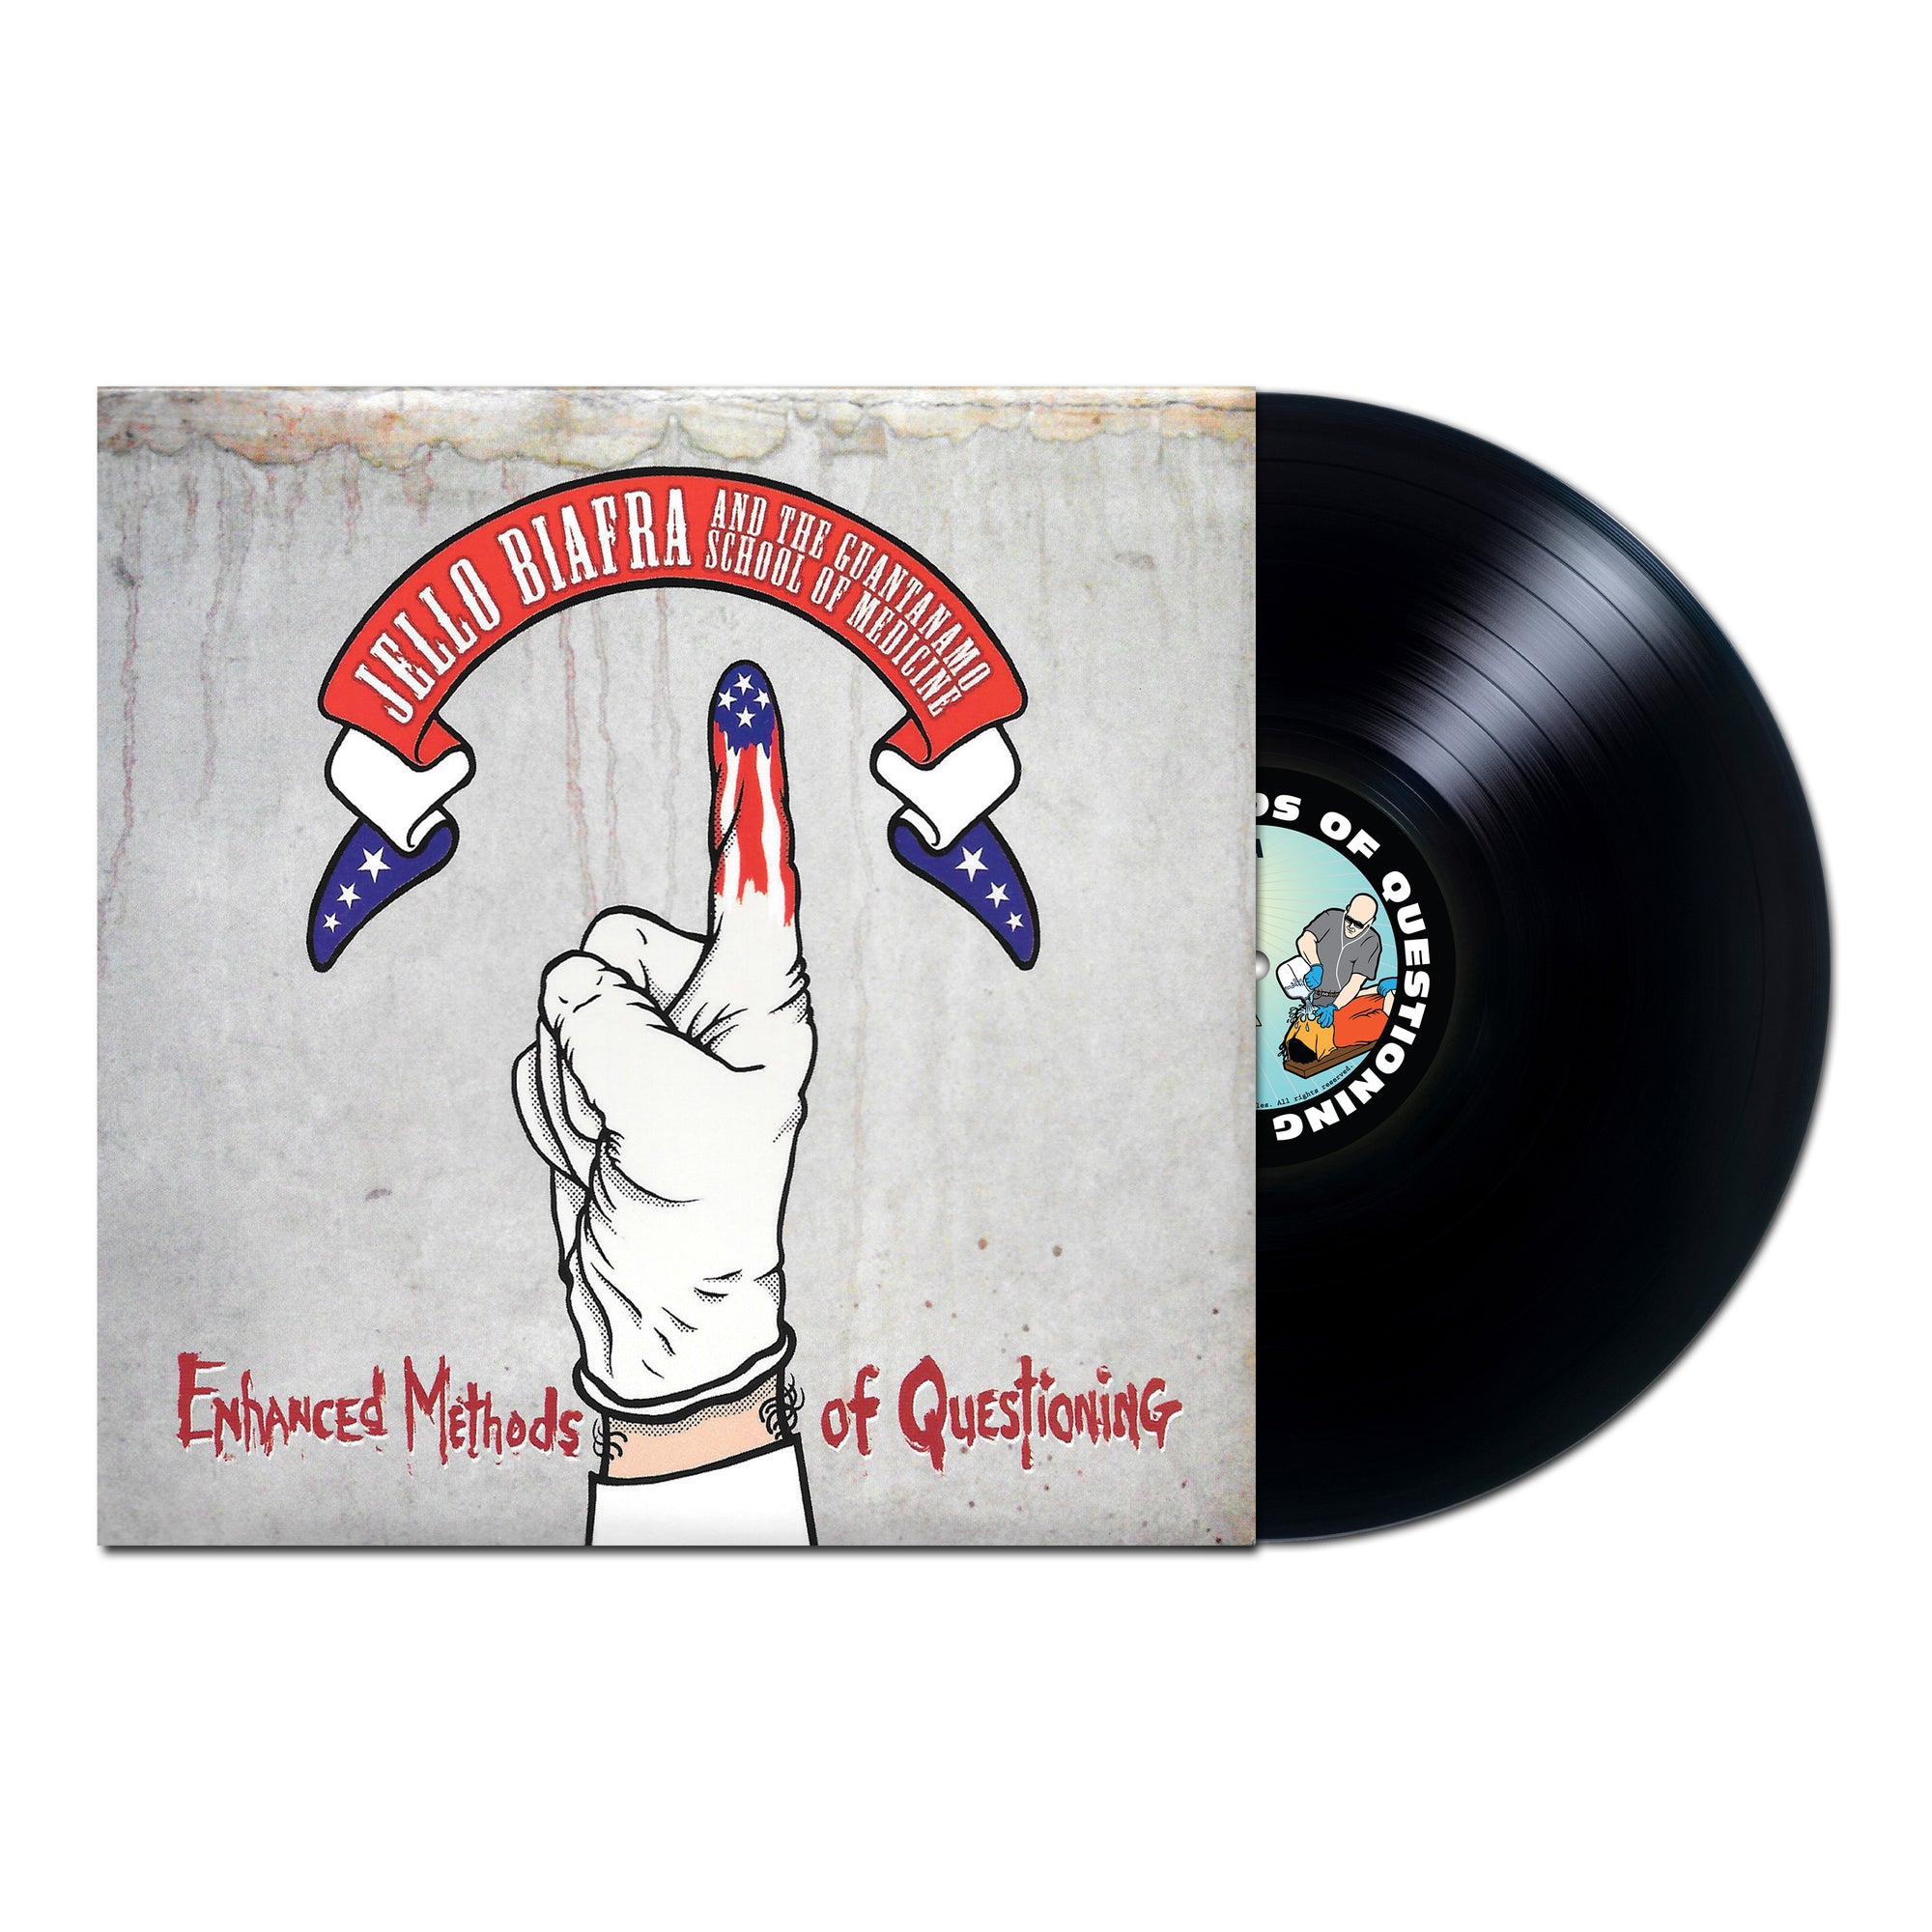 v430 - Jello Biafra And The Guantanamo School Of Medicine - "Enhanced Methods Of Questioning" - Pre-Order